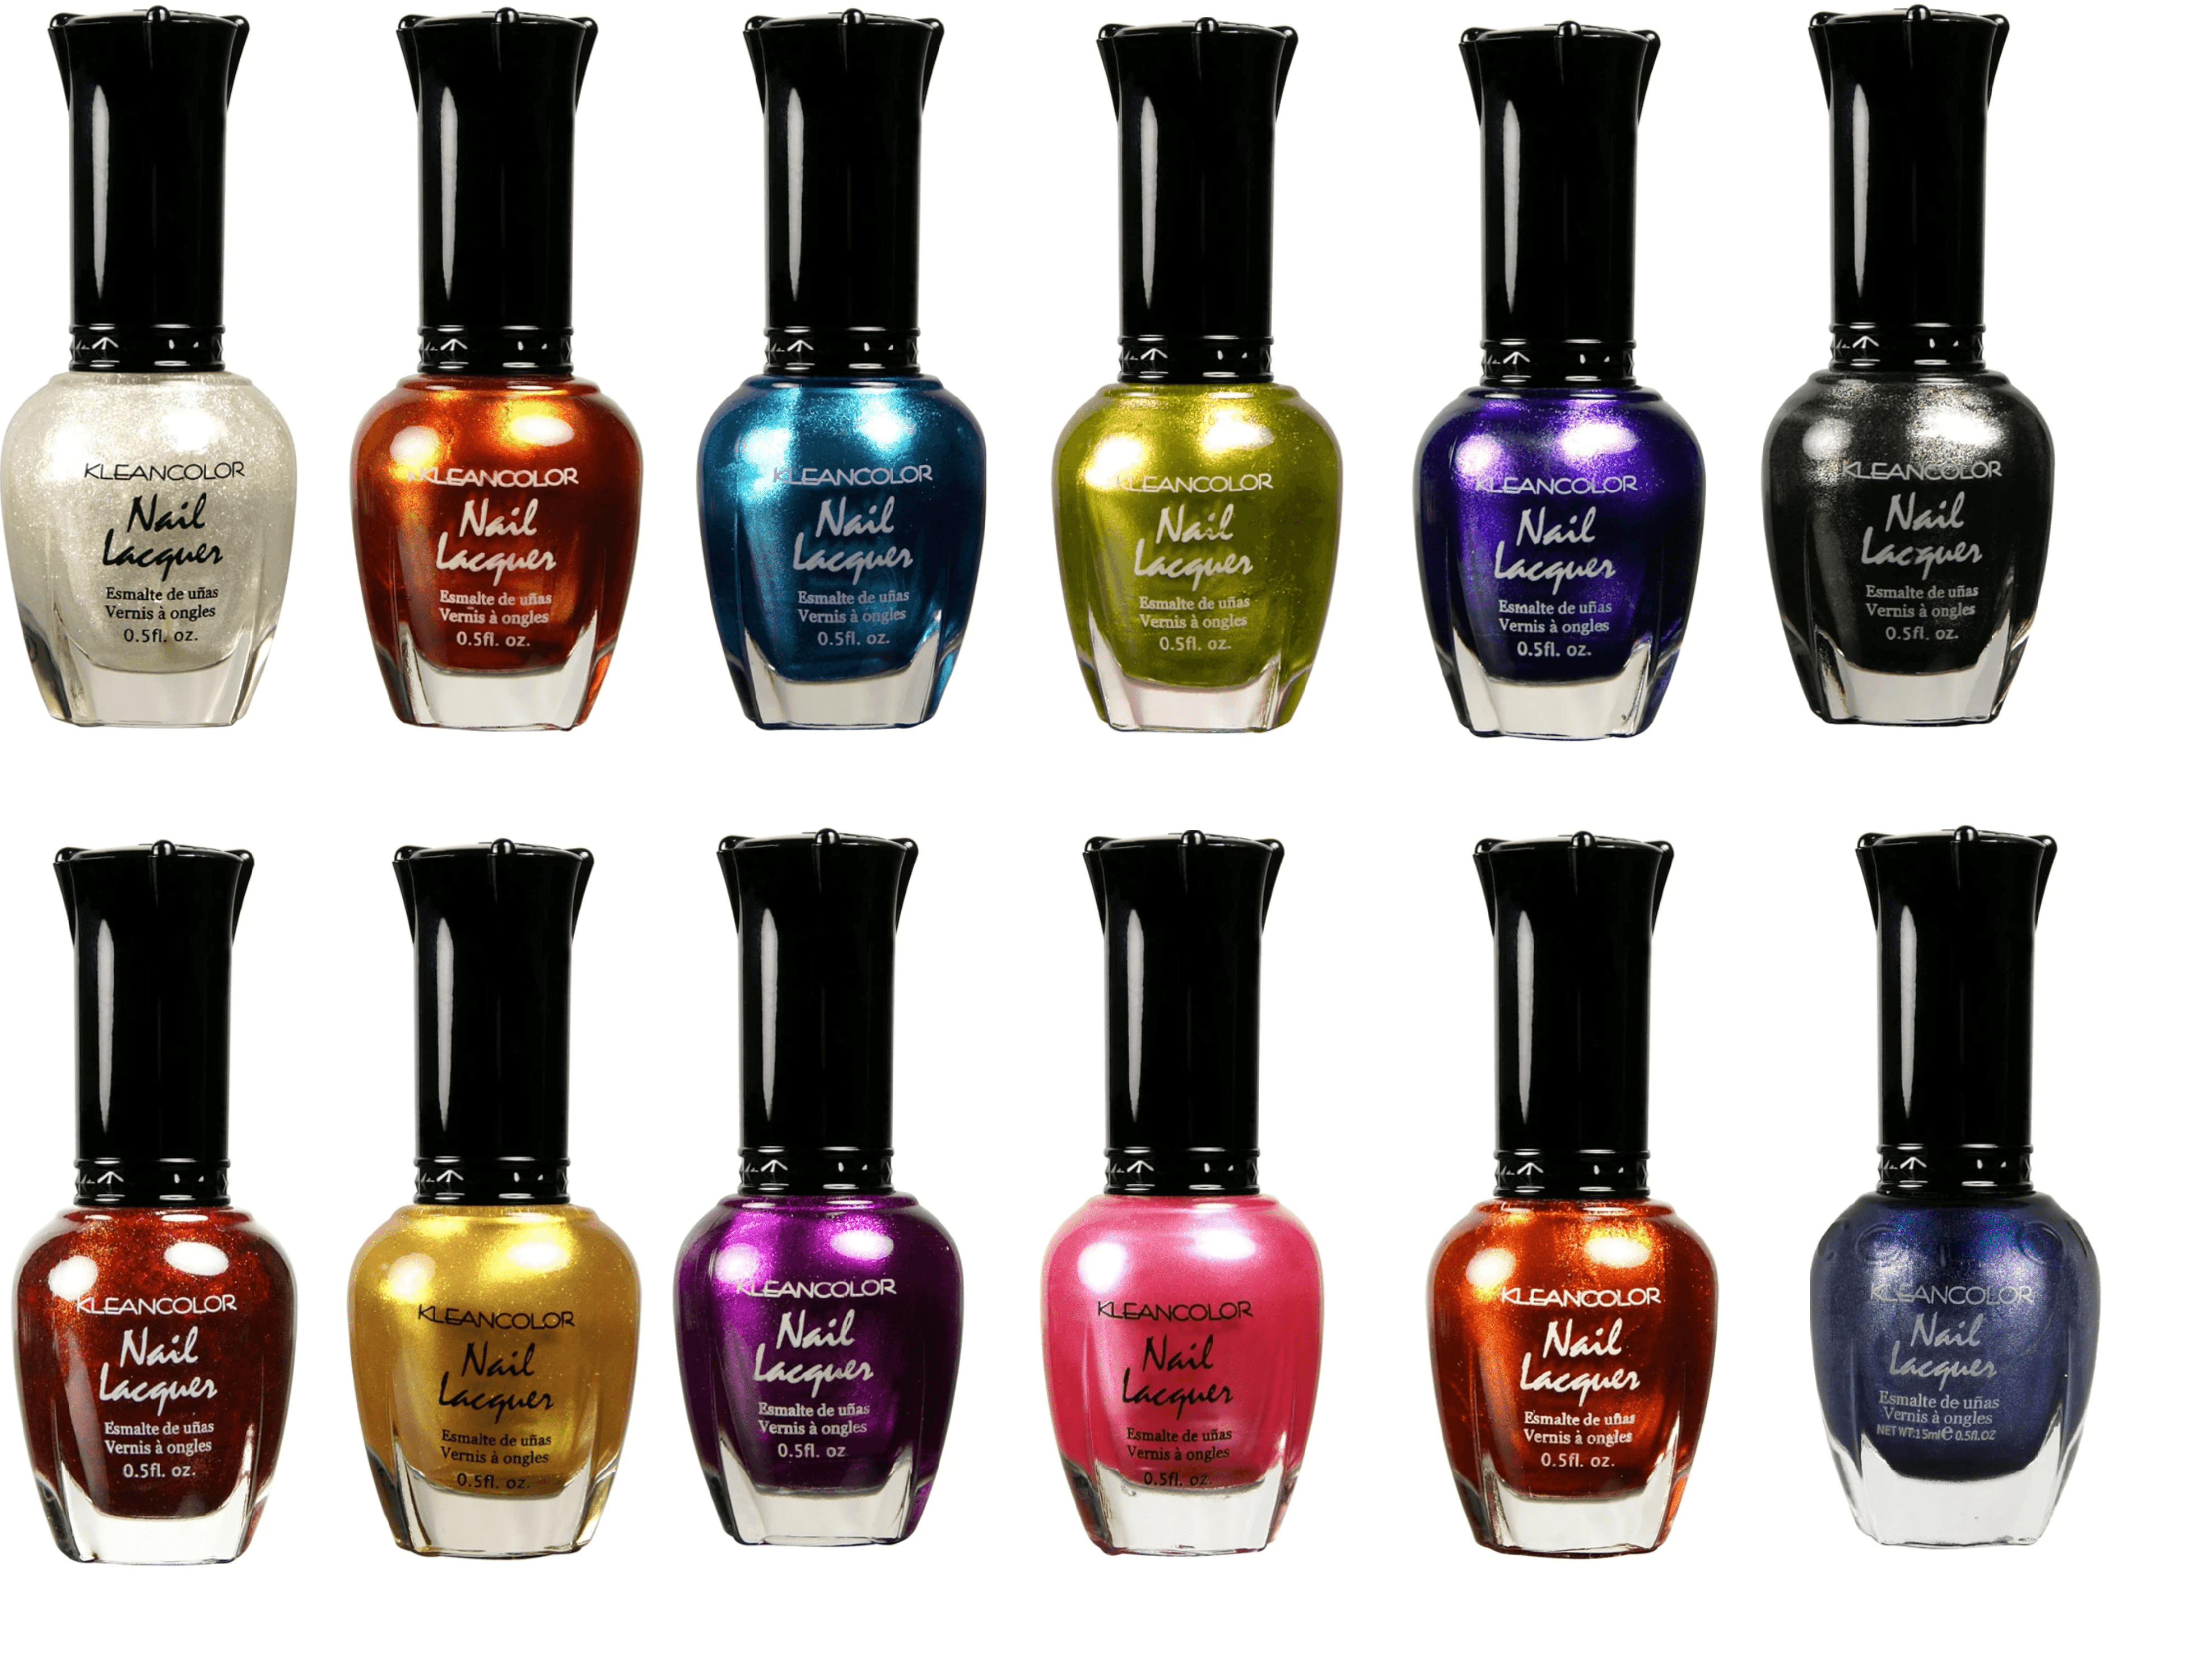 5. "Elegant Nail Polish Shades for Women in Their 50s" - wide 9